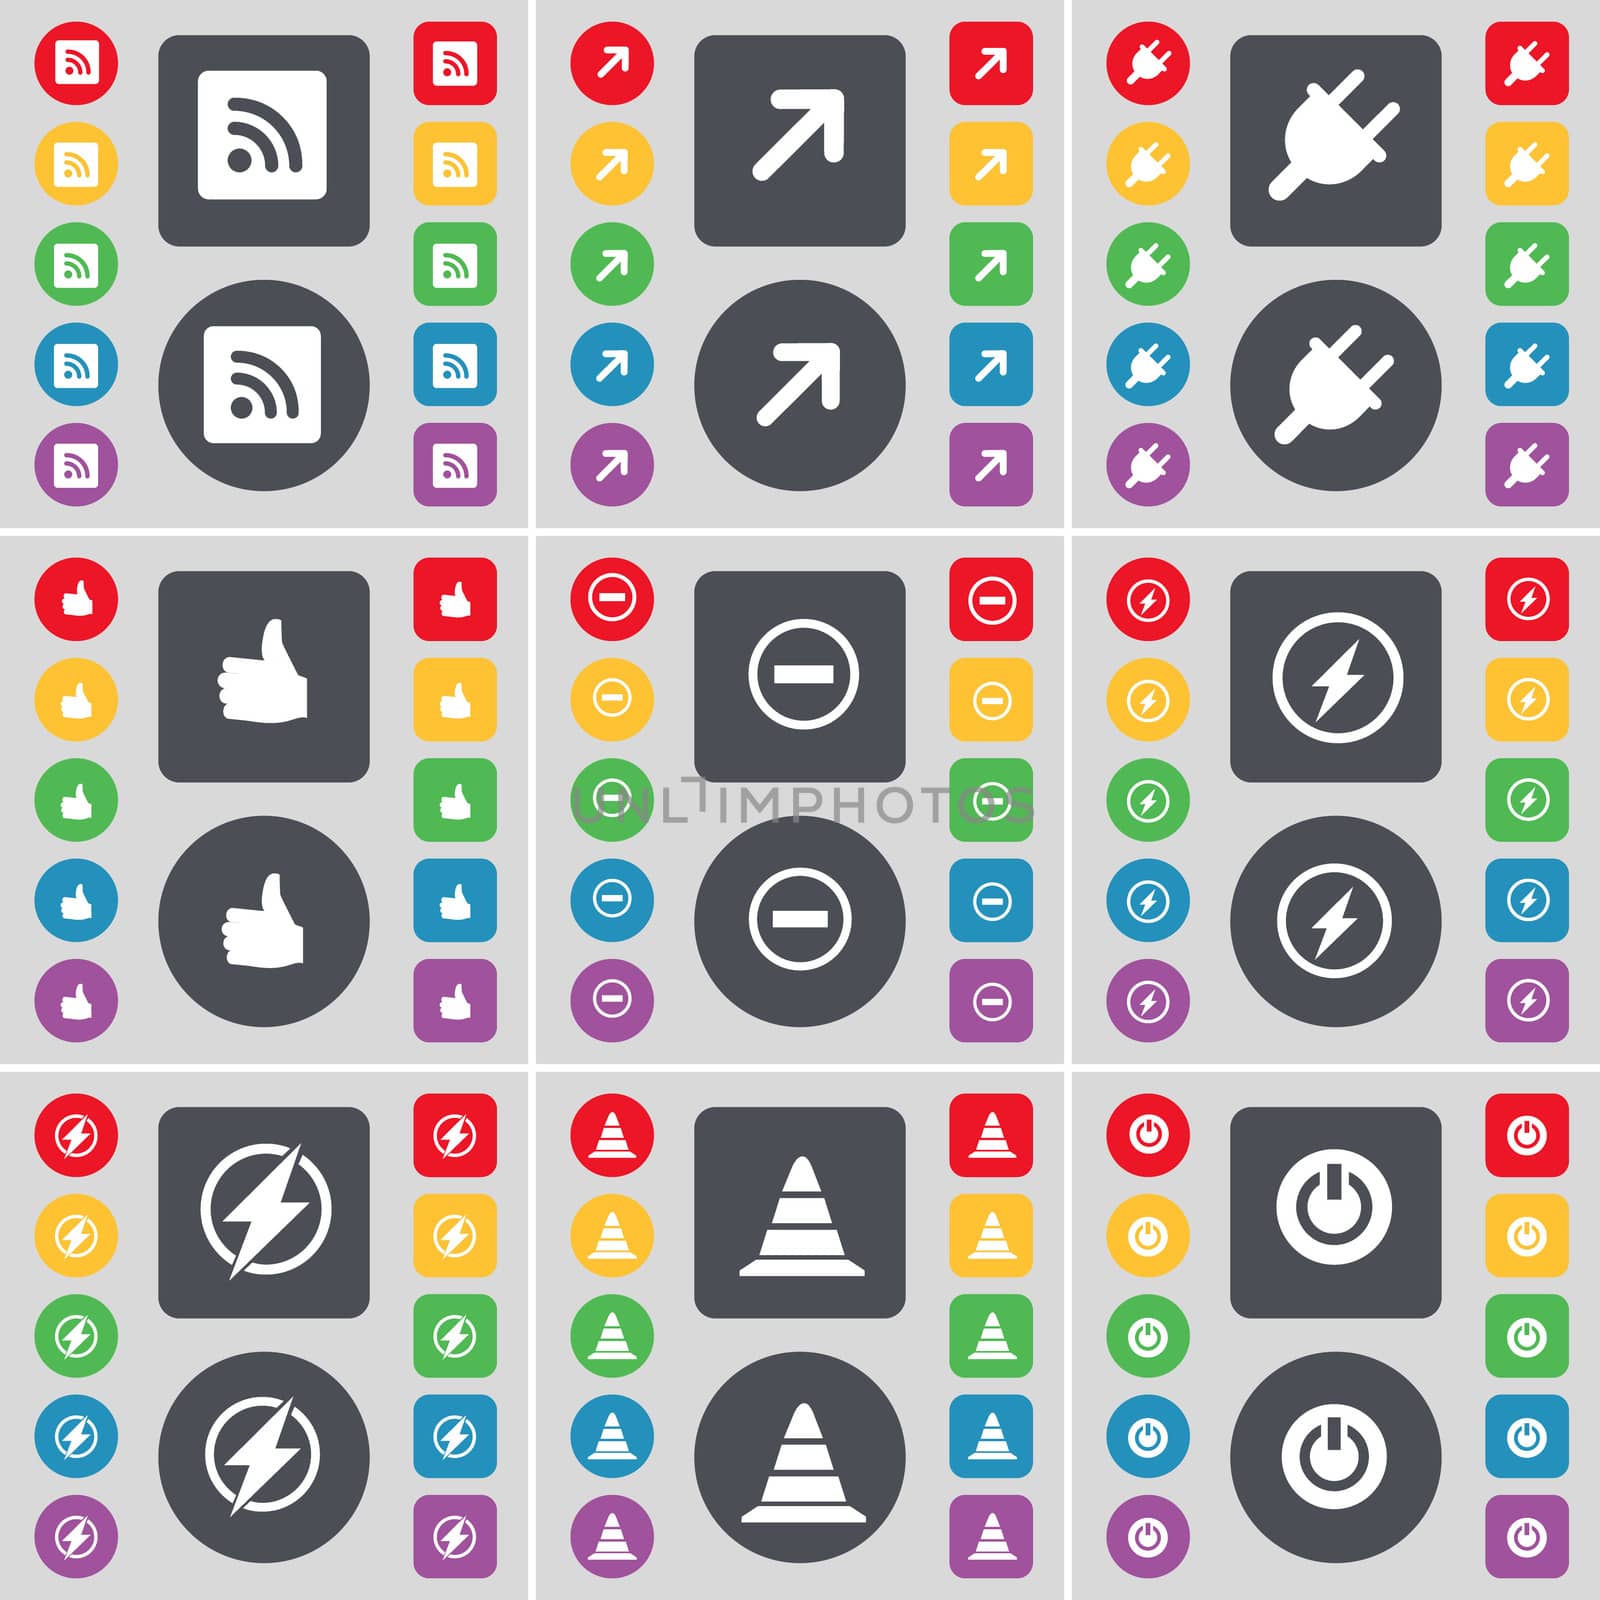 RSS, Full screen, Socket, Like, Minus, Flash, Cone, Power icon symbol. A large set of flat, colored buttons for your design.  by serhii_lohvyniuk